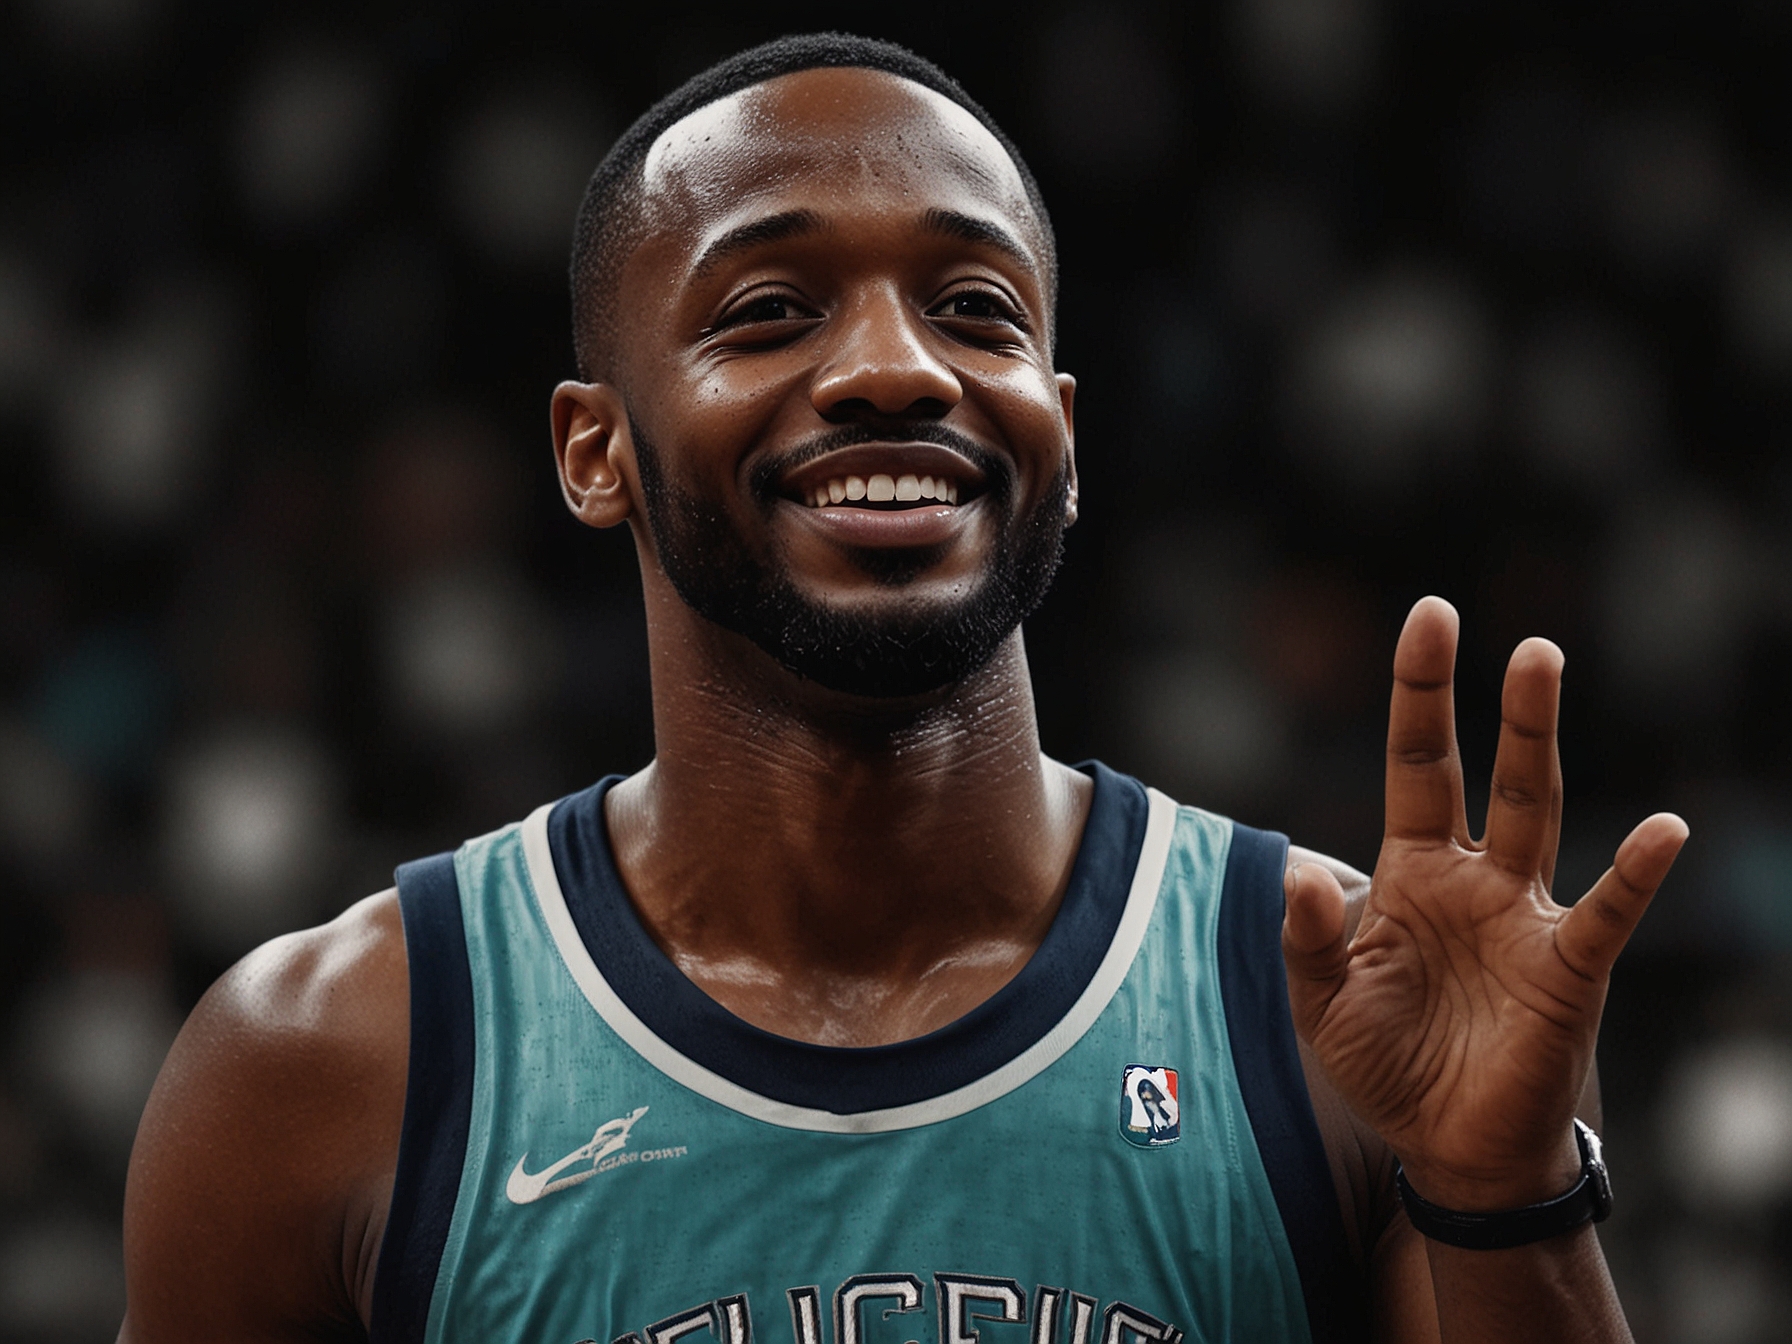 Kemba Walker waving to fans at his retirement announcement, capturing the emotion of an illustrious career spanning 12 NBA seasons and countless memorable moments.